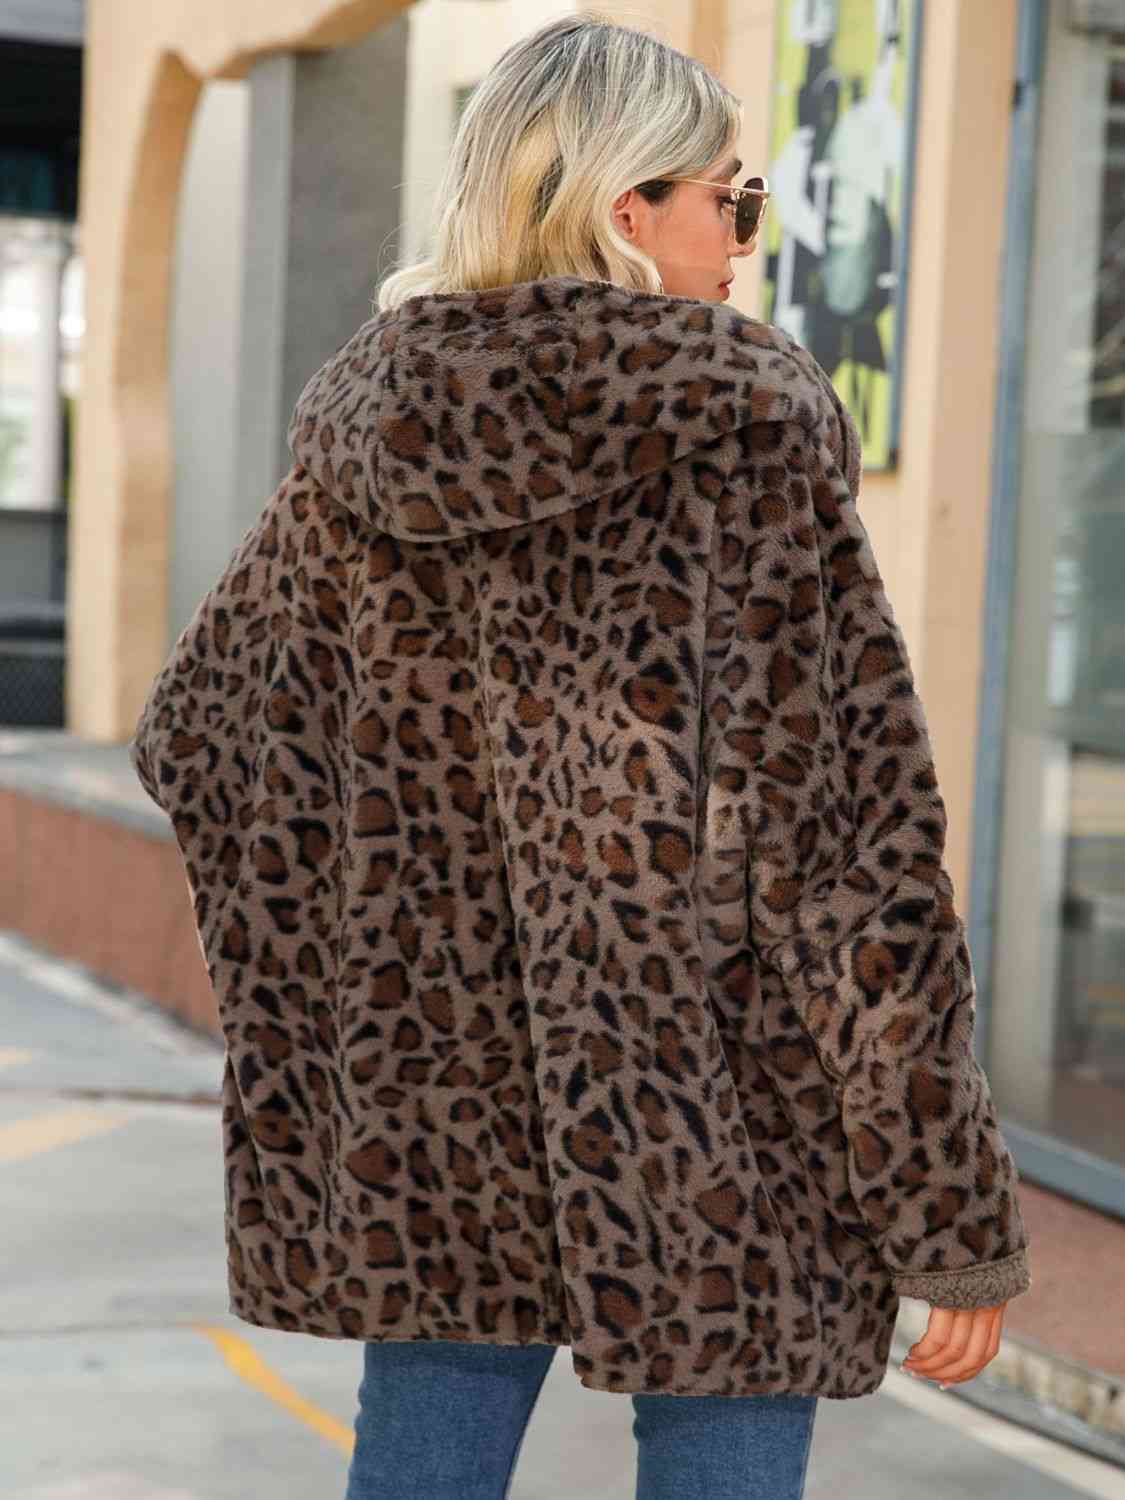 Dim Gray Leopard Hooded Coat with Pockets Trends